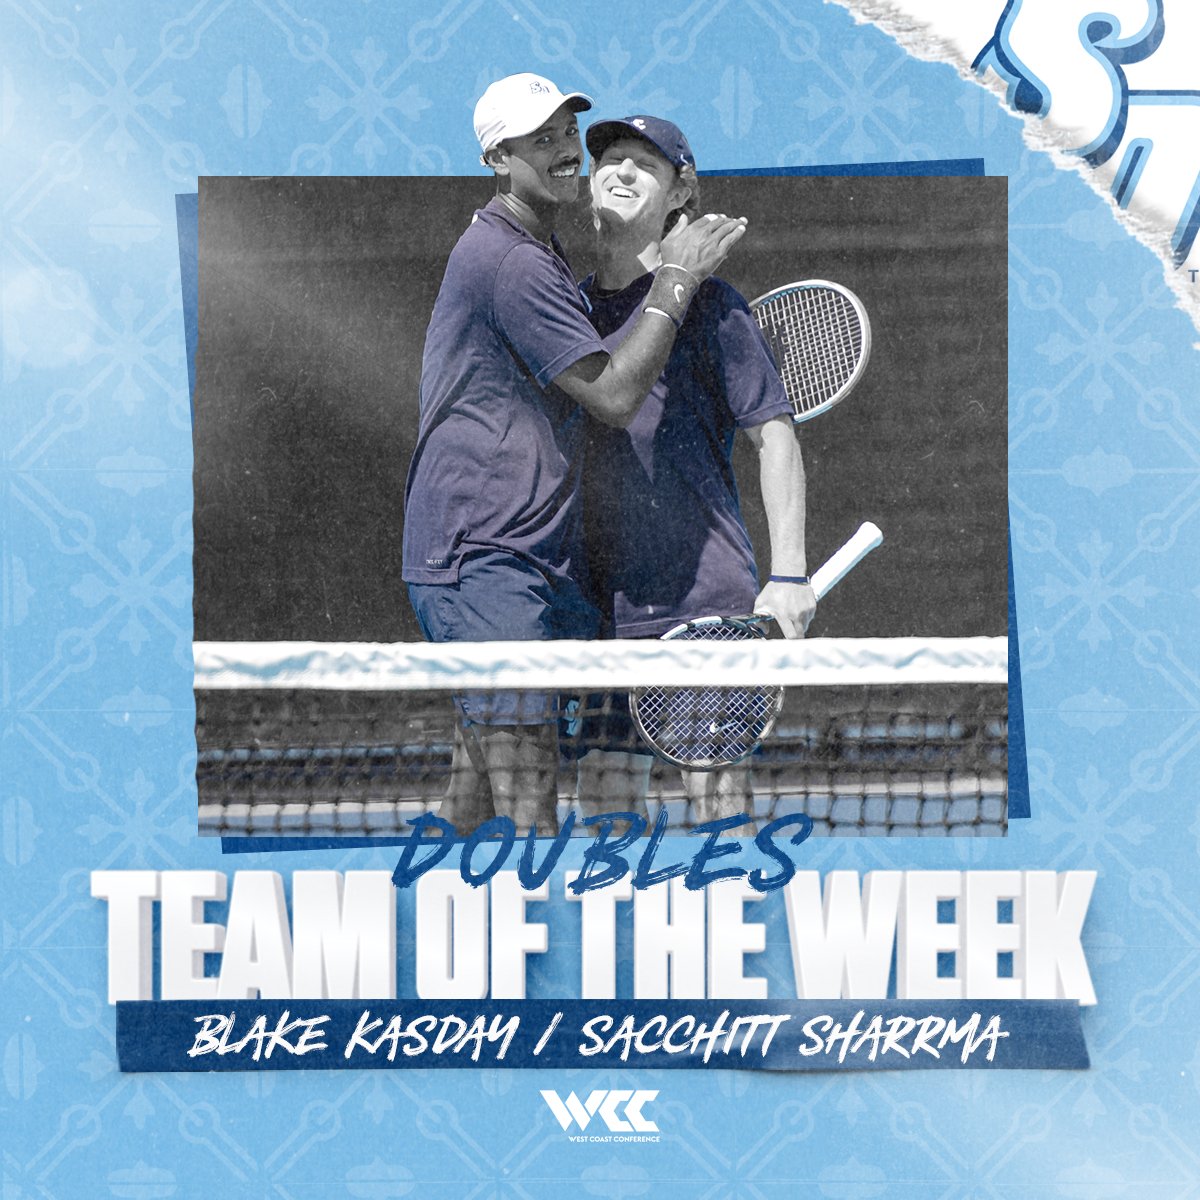 Ended the regular season with our 15th (!) weekly honor 👊 Congrats to Blake and Sacchitt for being named the @WCCSports Doubles Team of the Week! 📰: bit.ly/3WbVjGX #GoToreros